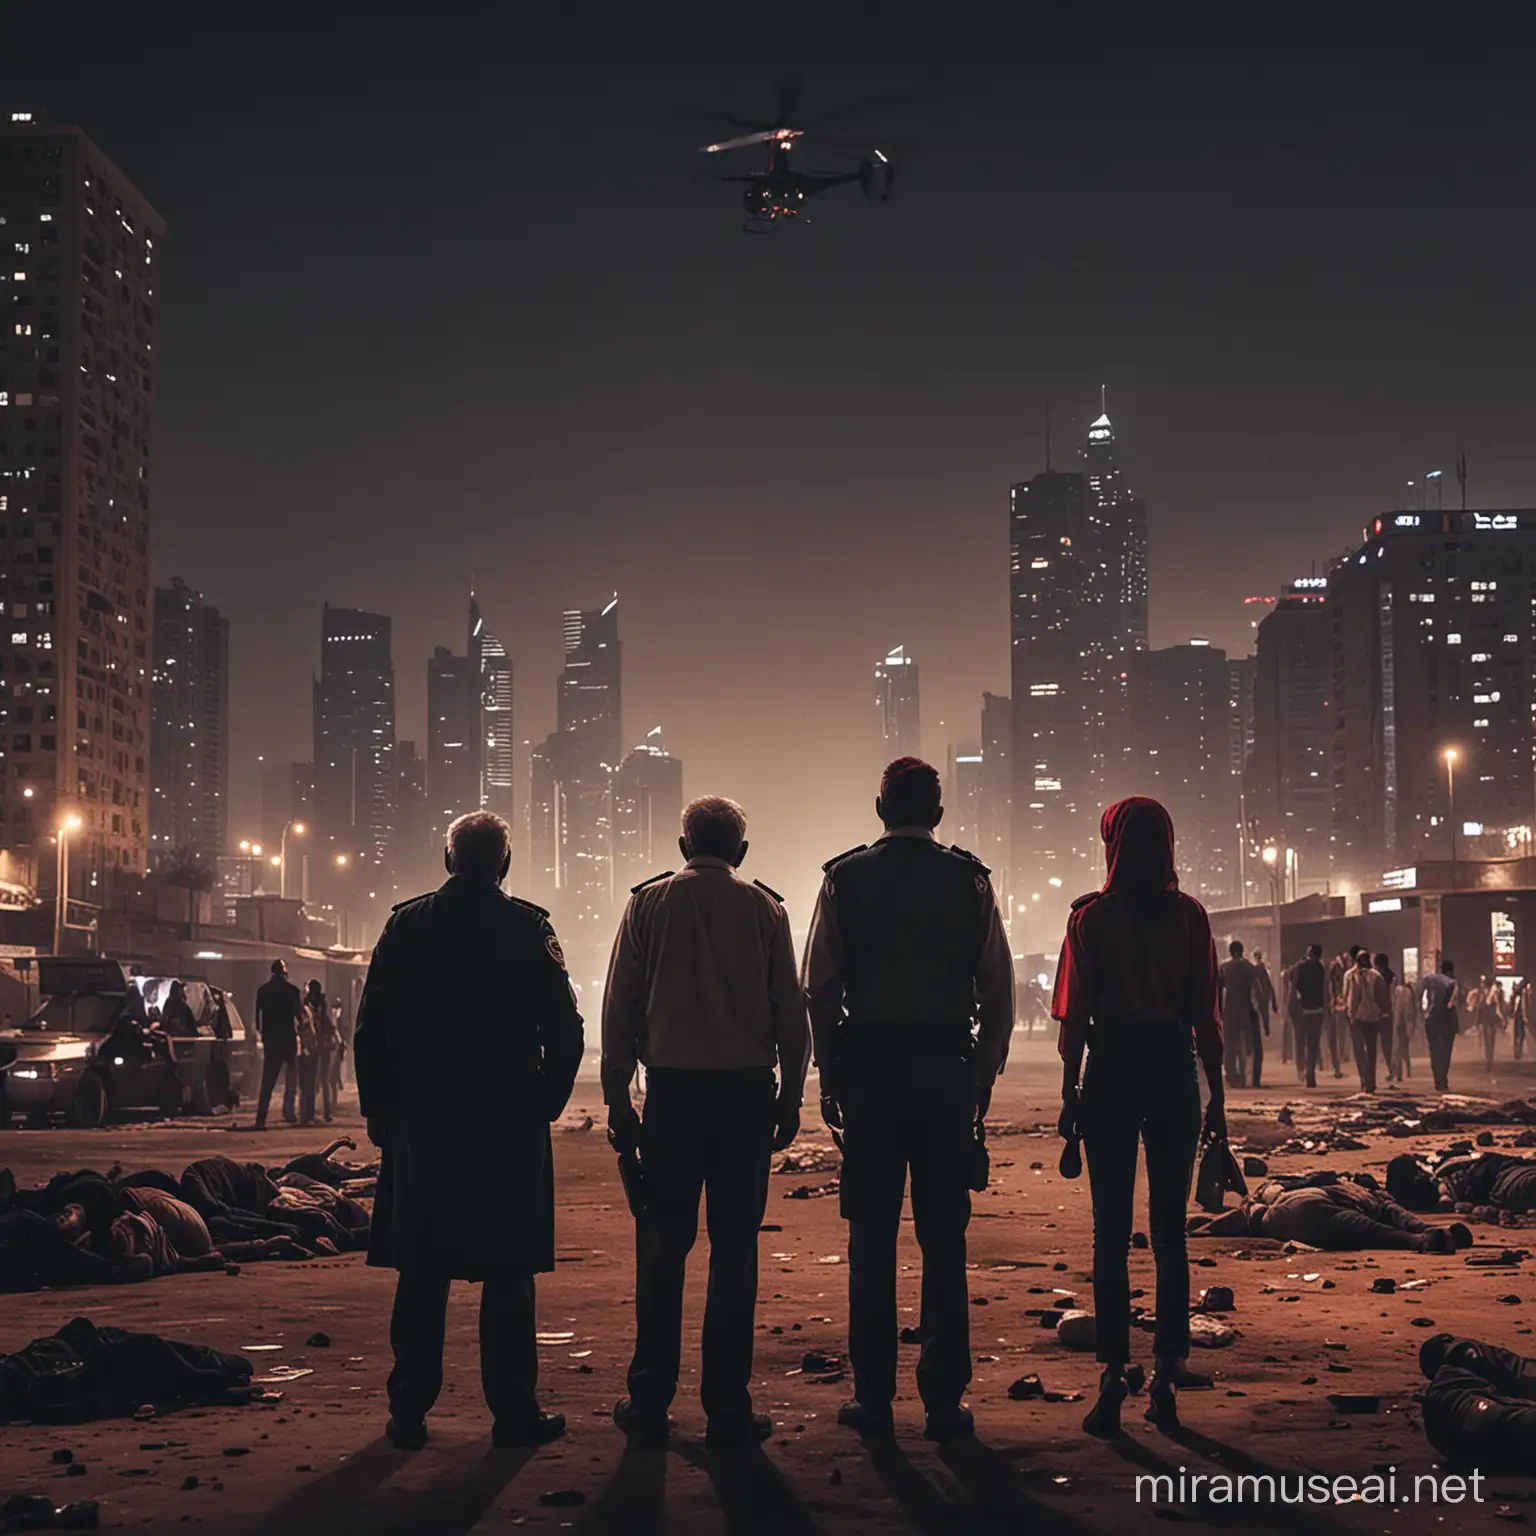 Group, 3 men, 1 women(dark red hair), fired police man, old man, another man, journey, dystopia city separated from  utopia city, war, poverty, helicopters, dead bodies, police, dark effect, skyscrapers background, night, Cairo, Egypt 